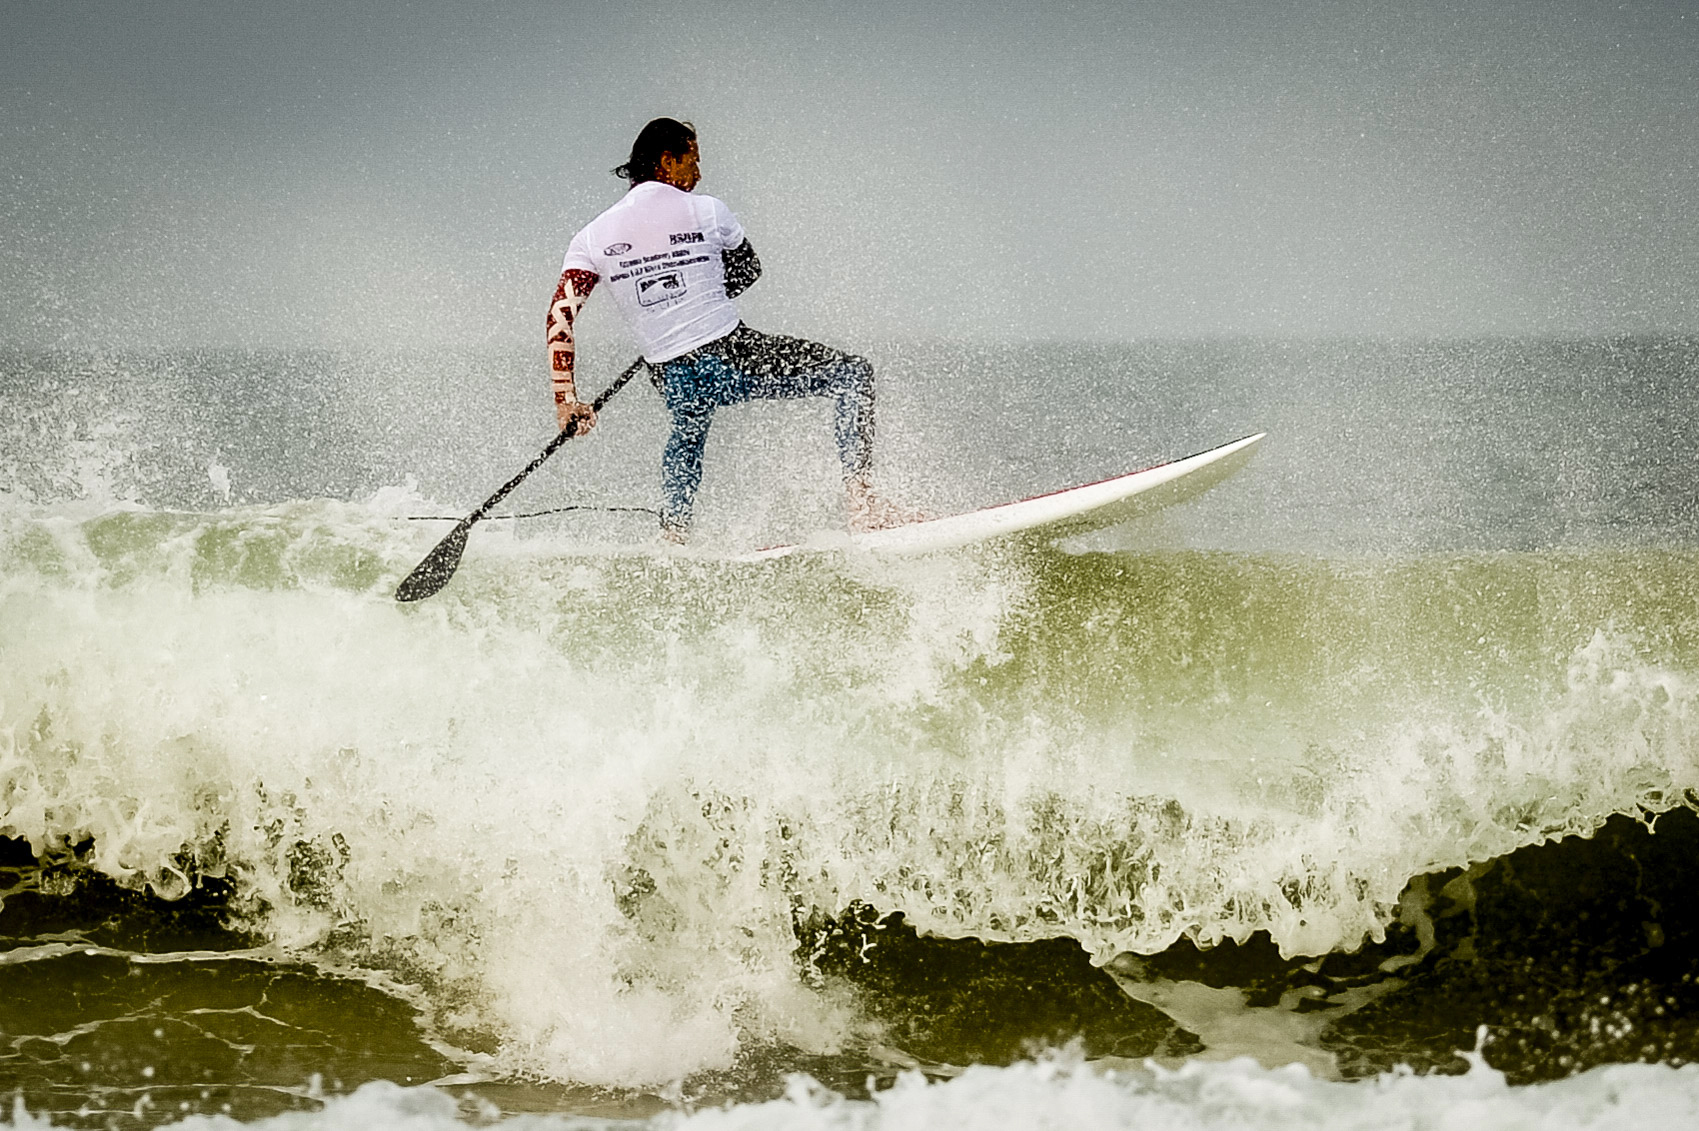 A stand-up paddleboarder floats on waves during British Sup Association championships at Watergate Bay, Cornwall in 2015